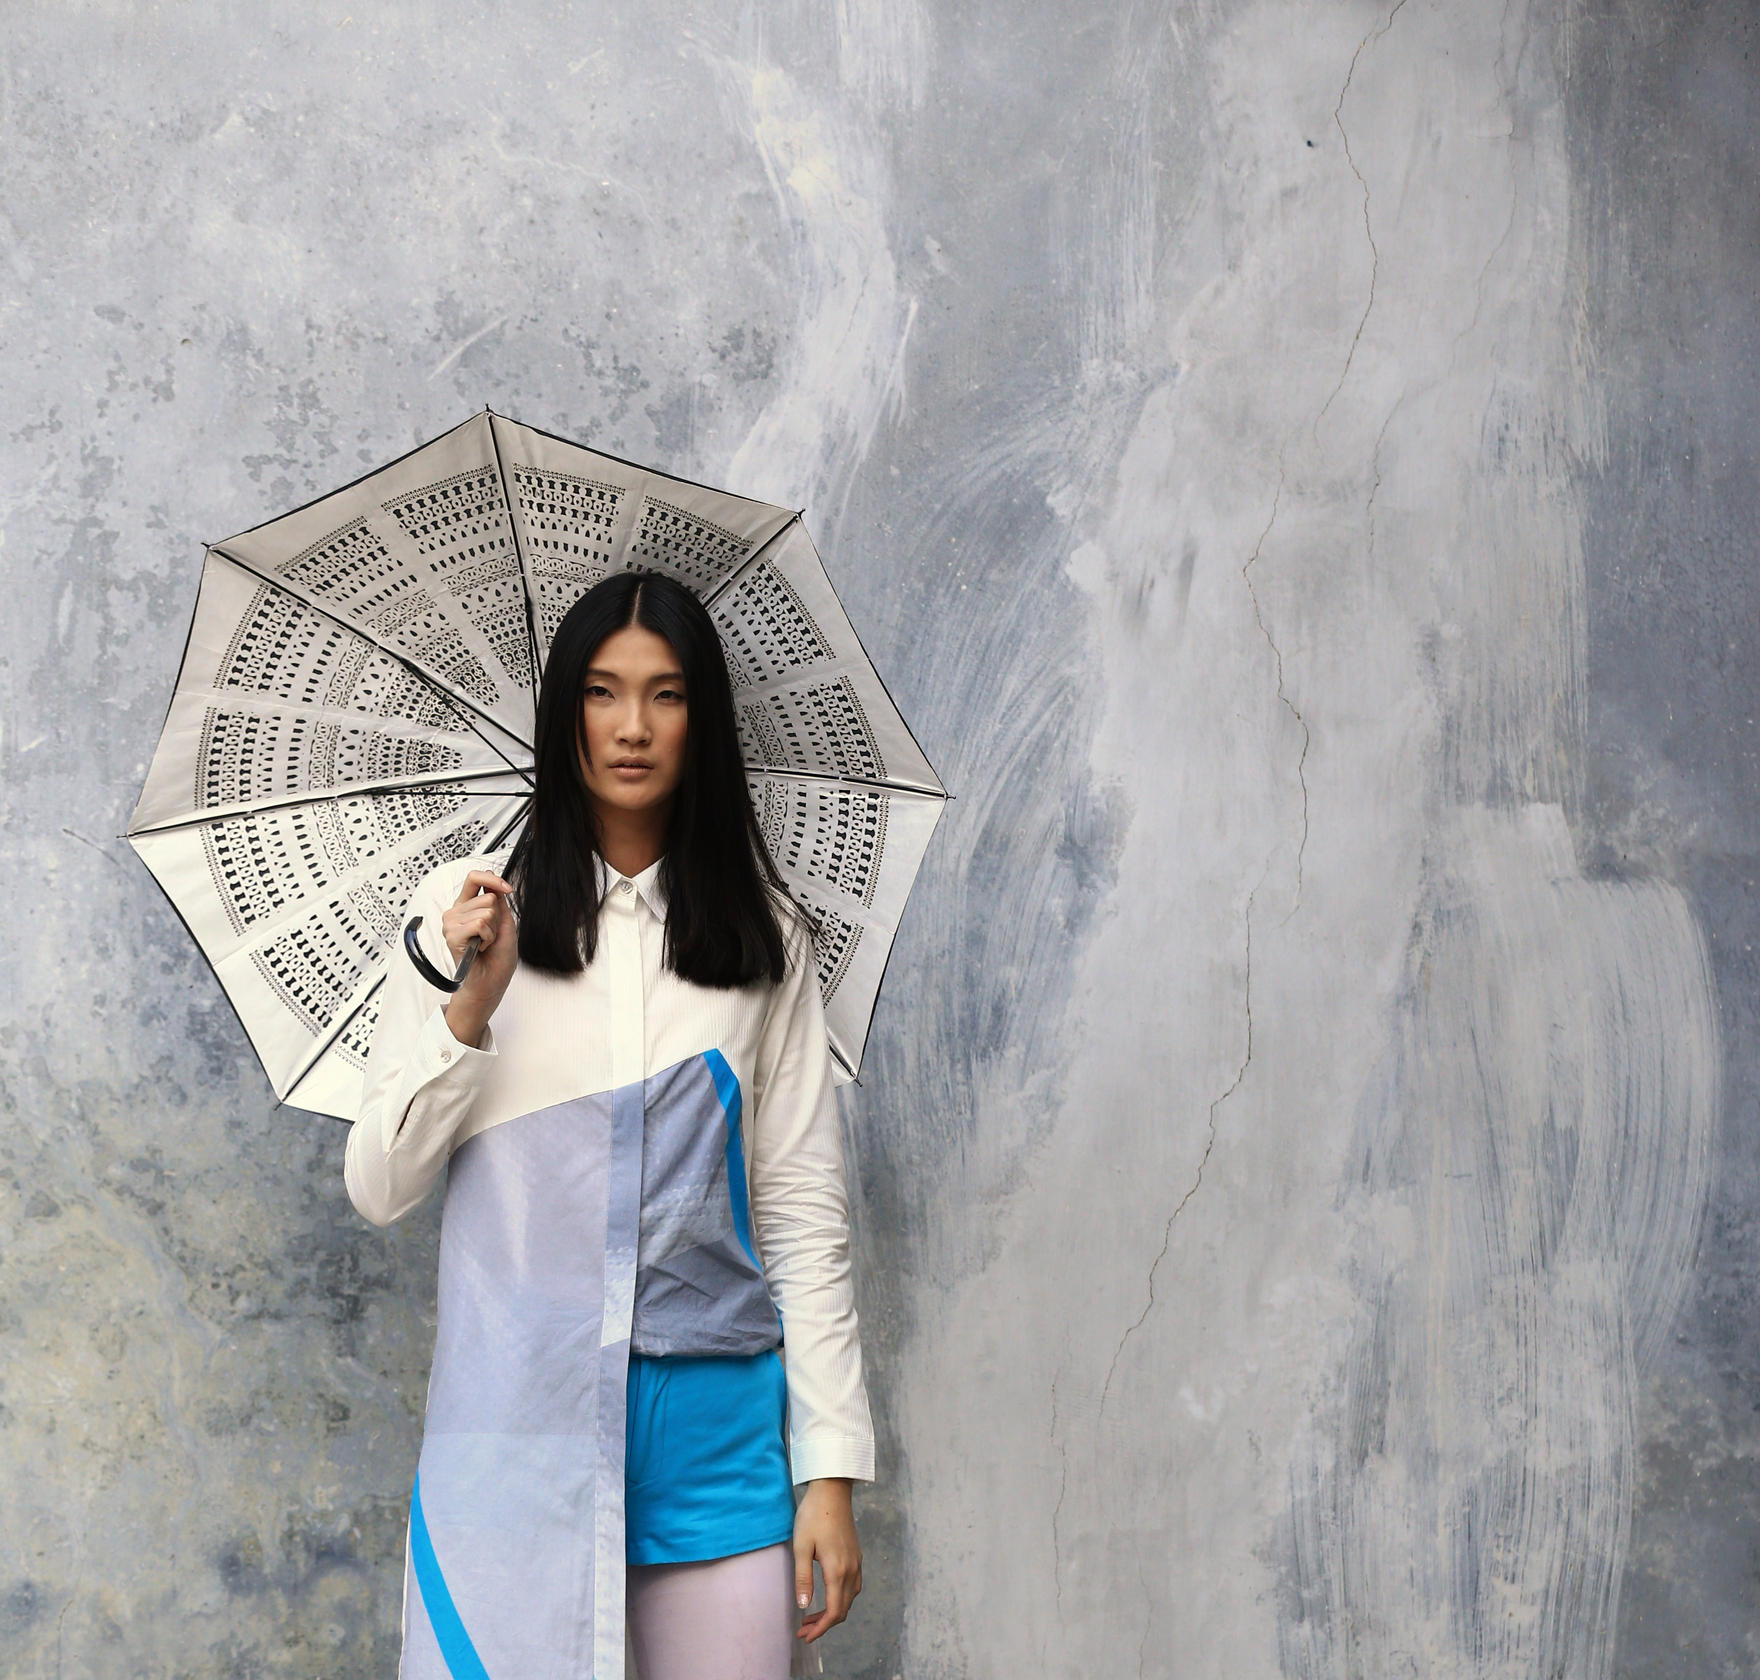 A look from Lines Lab's Umbrella collection. Stylist: Clara Brito. Model: Emma Xie. Photographer: Kester Celestino